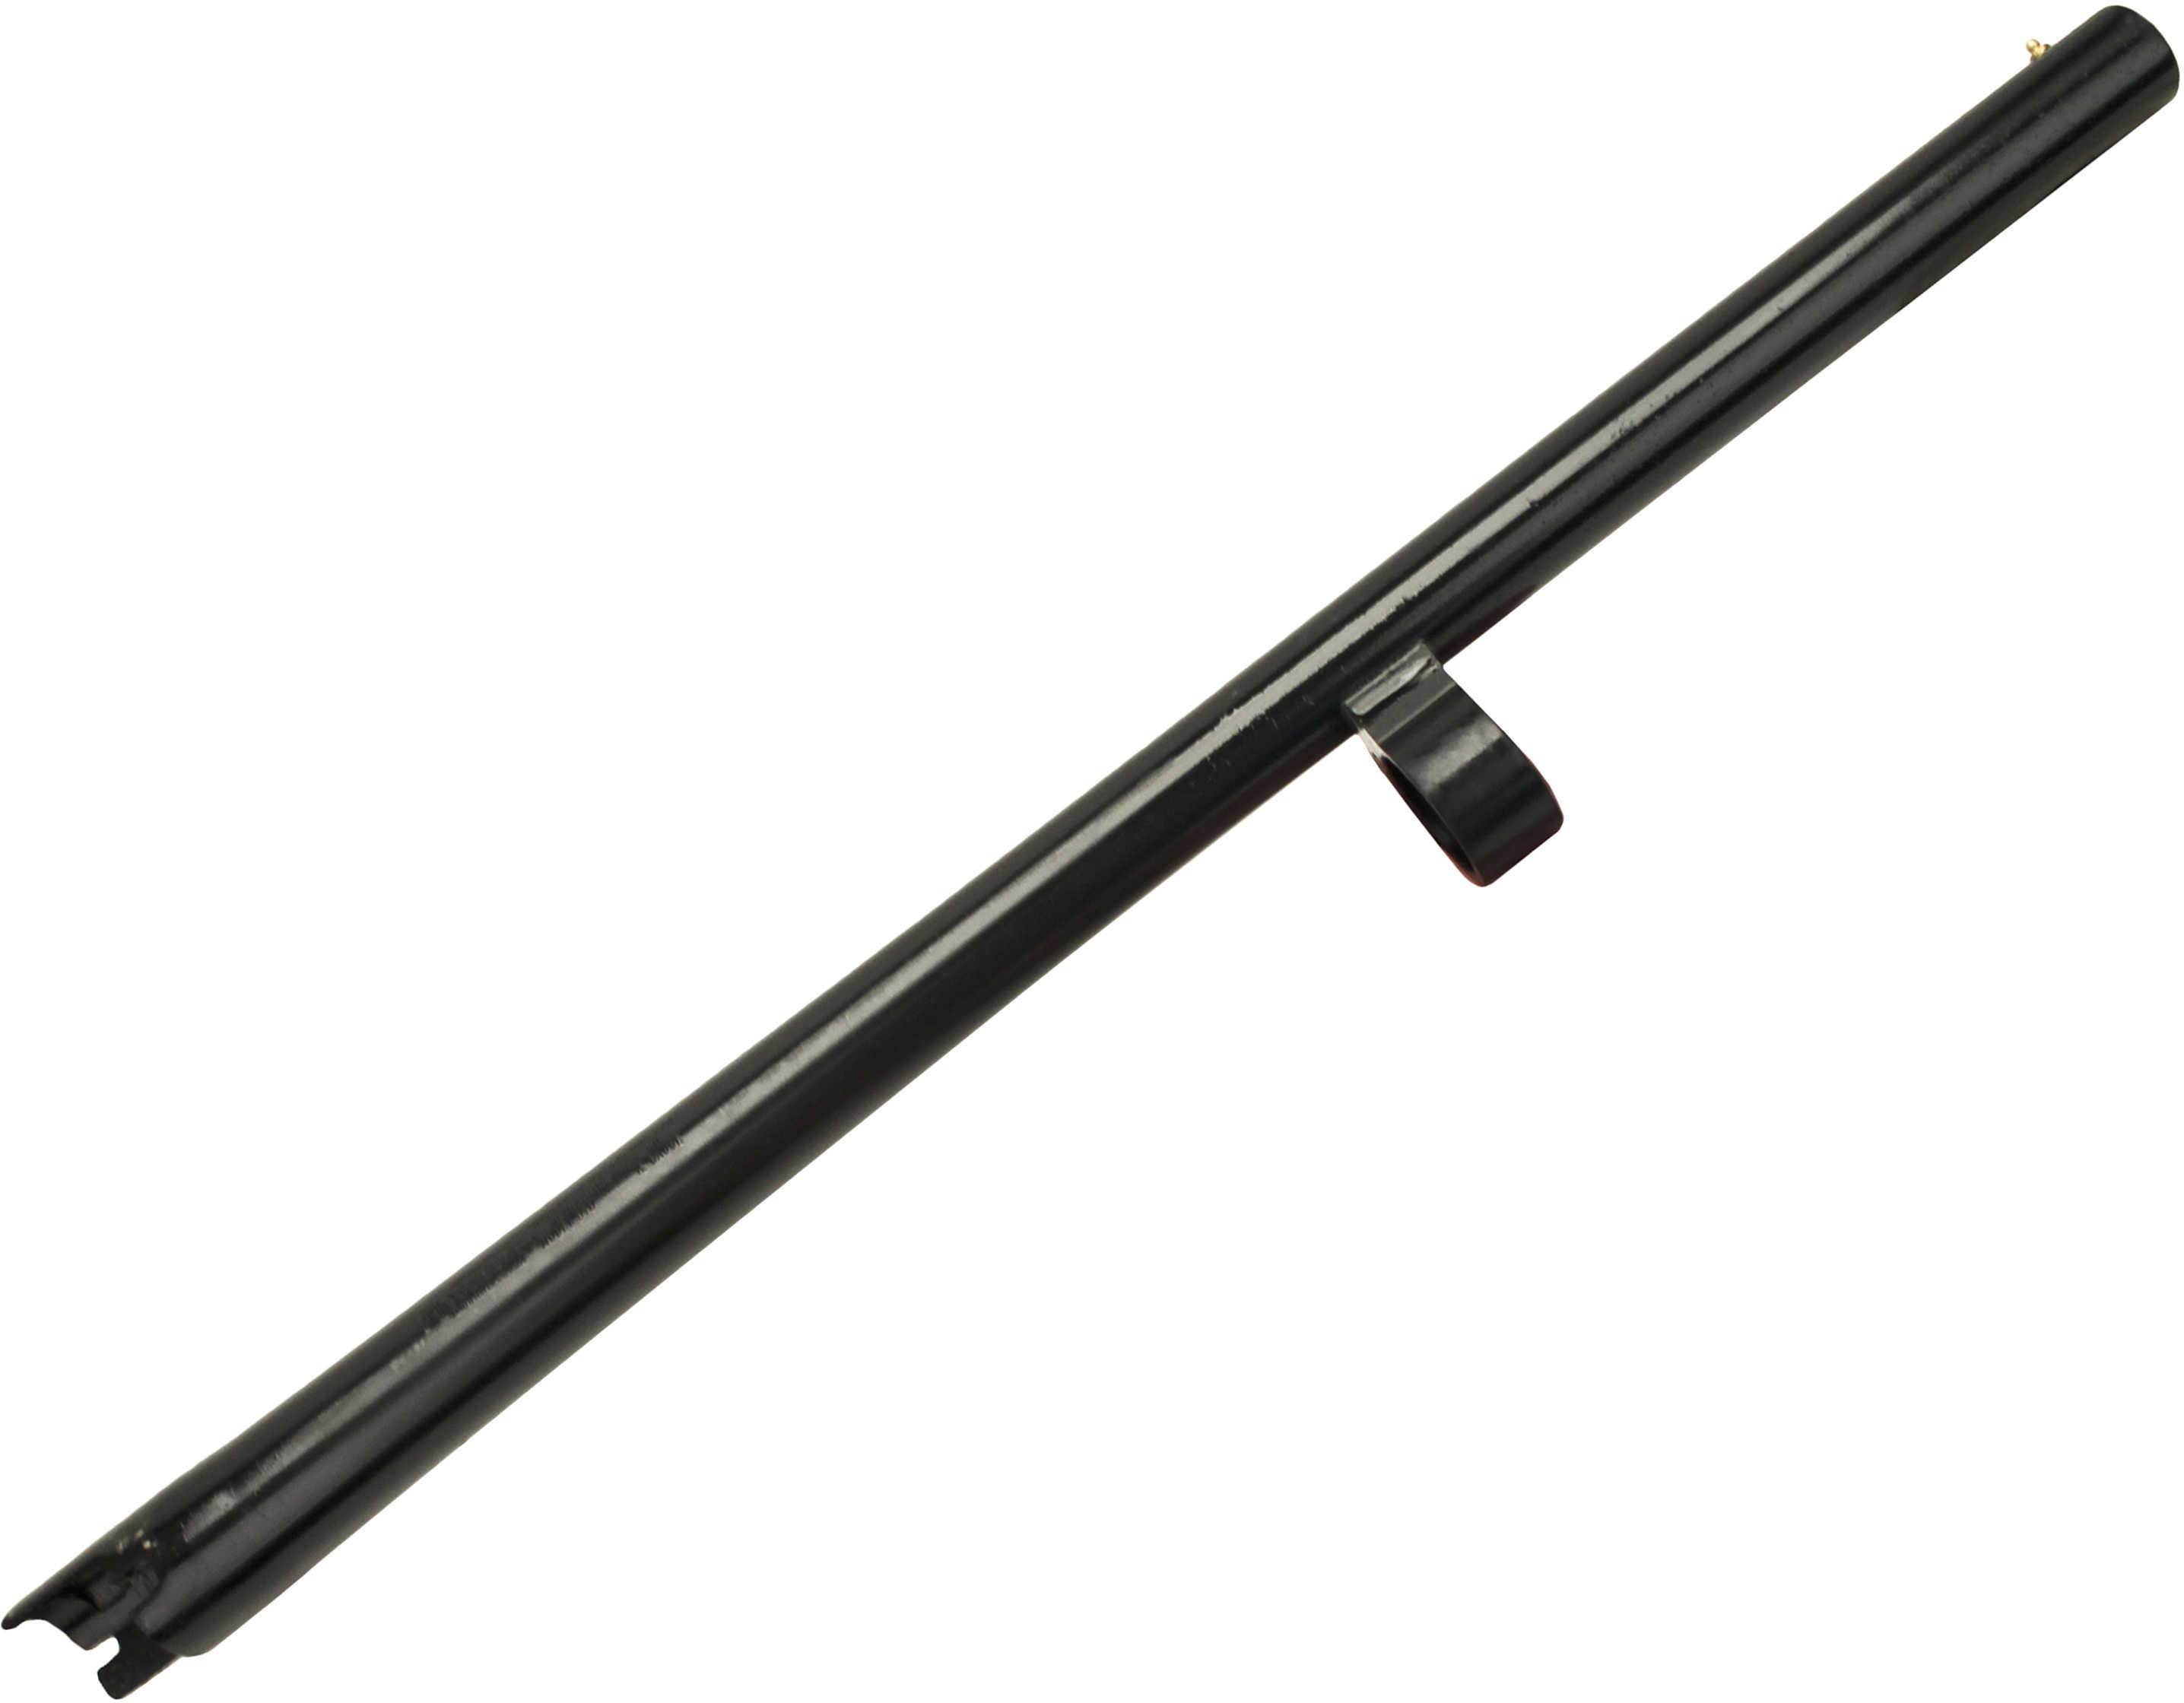 Mossberg Remington 870 Barrel Security - Plain 12 Gauge 18.5" Cylinder Bore Bead Sight Blue Note: Due To The